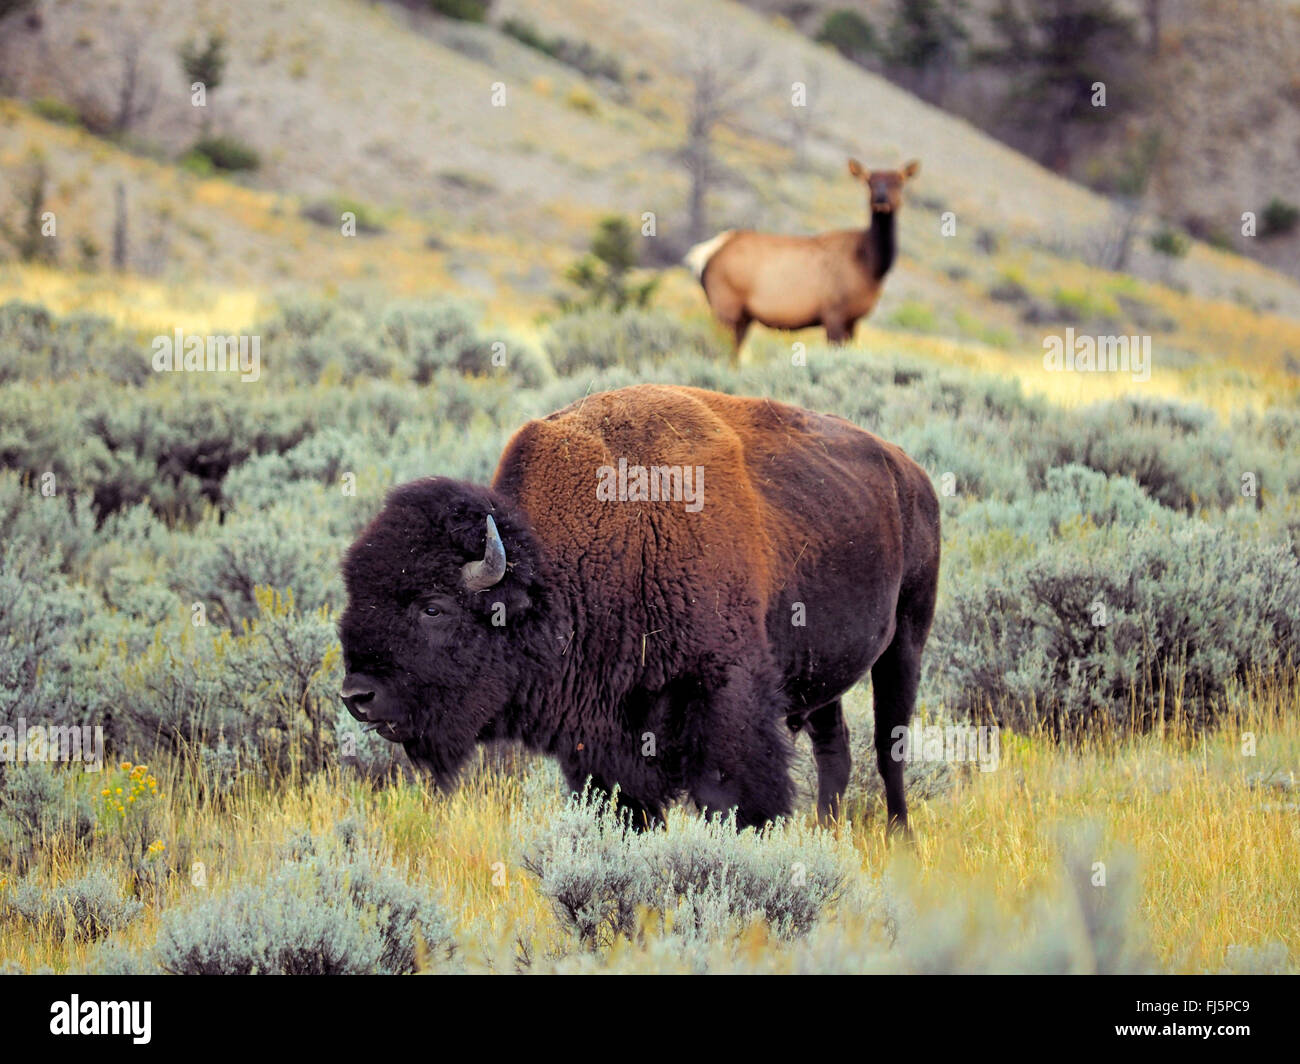 American bison, Bison (Bison bison), homme le bison et le wapiti, USA, Wyoming, Yellowstone National Park Banque D'Images